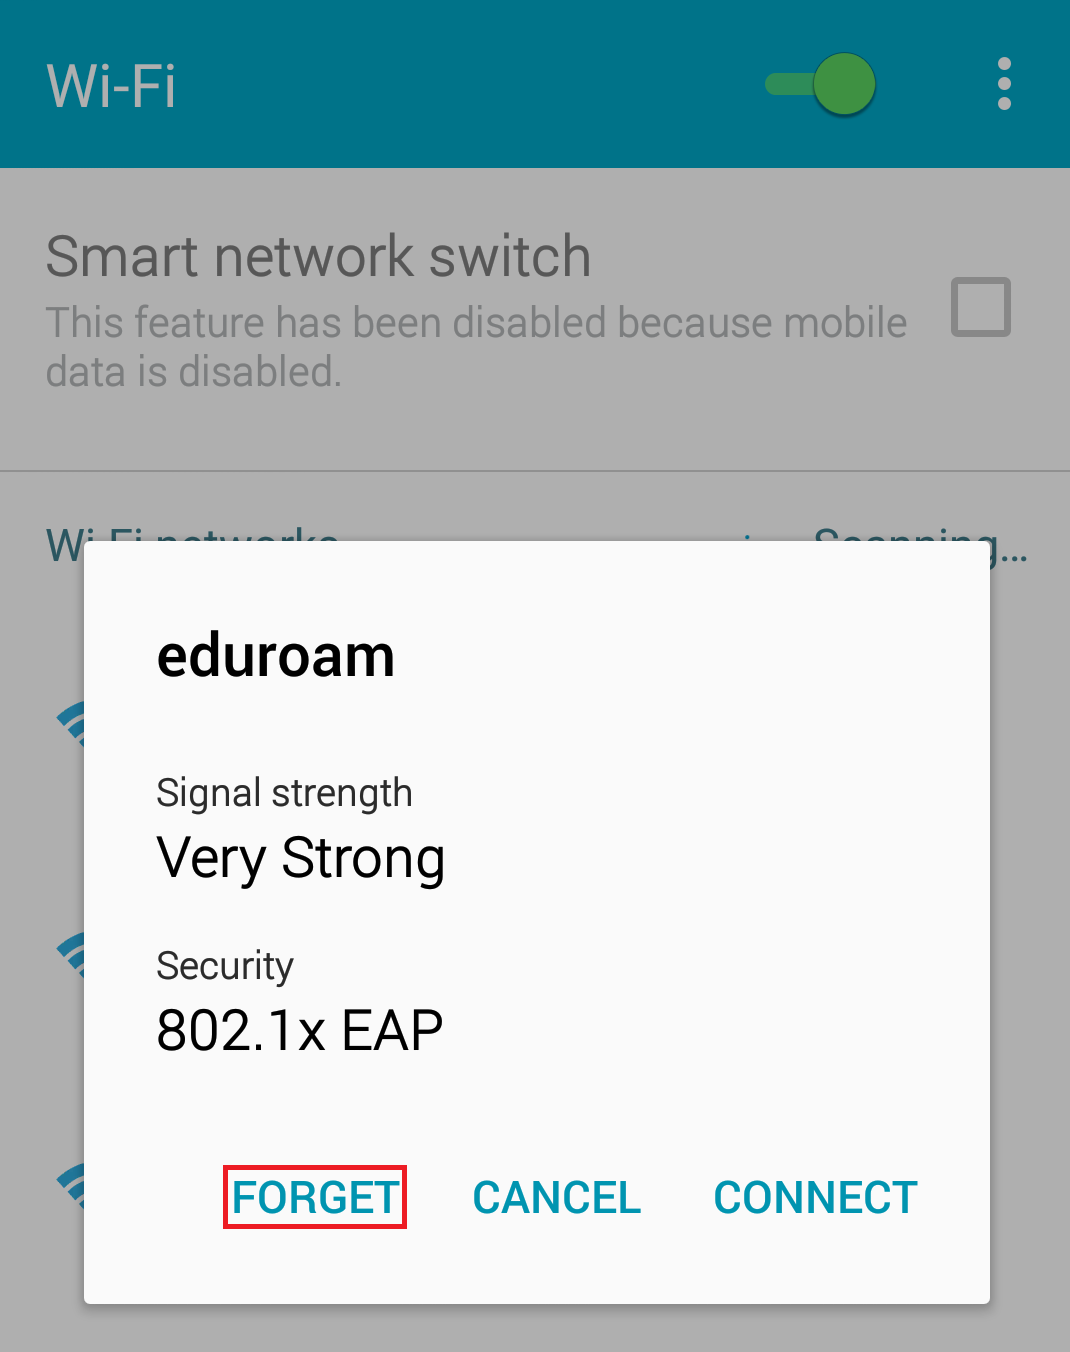 Forget stored eduroam connection settings